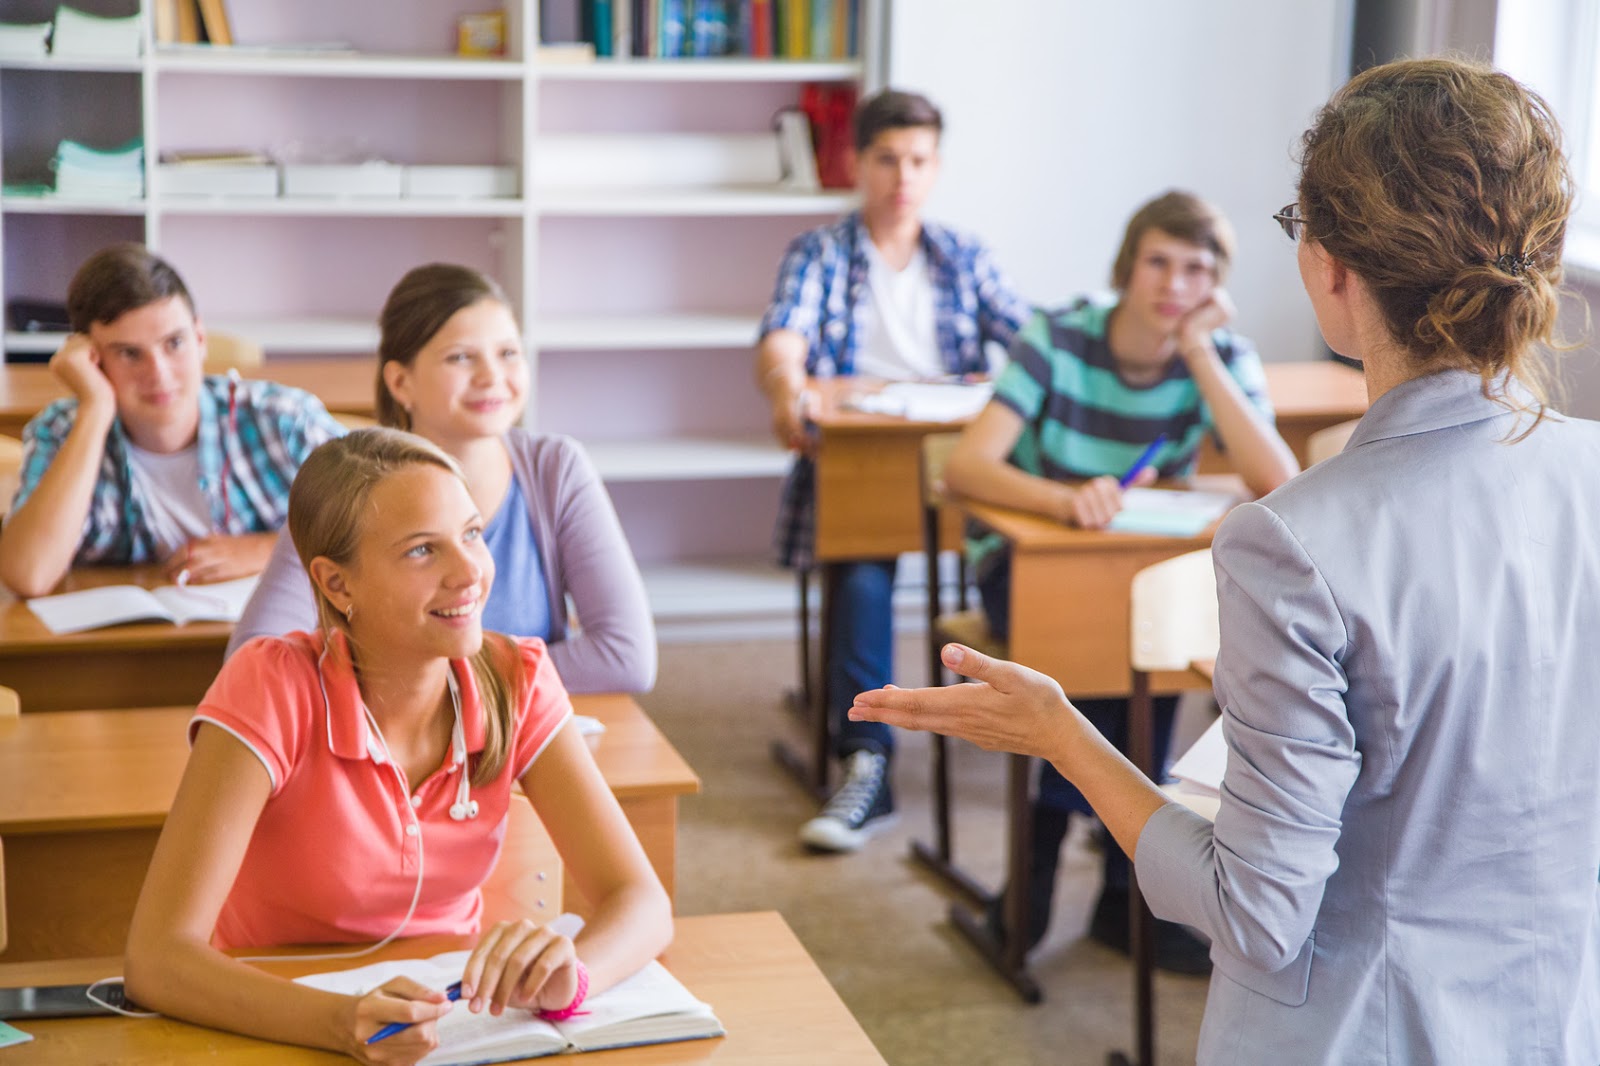 group of students listening to the teacher in the classroom at school -  Resources for English Language Learners and Teachers | Pearson English